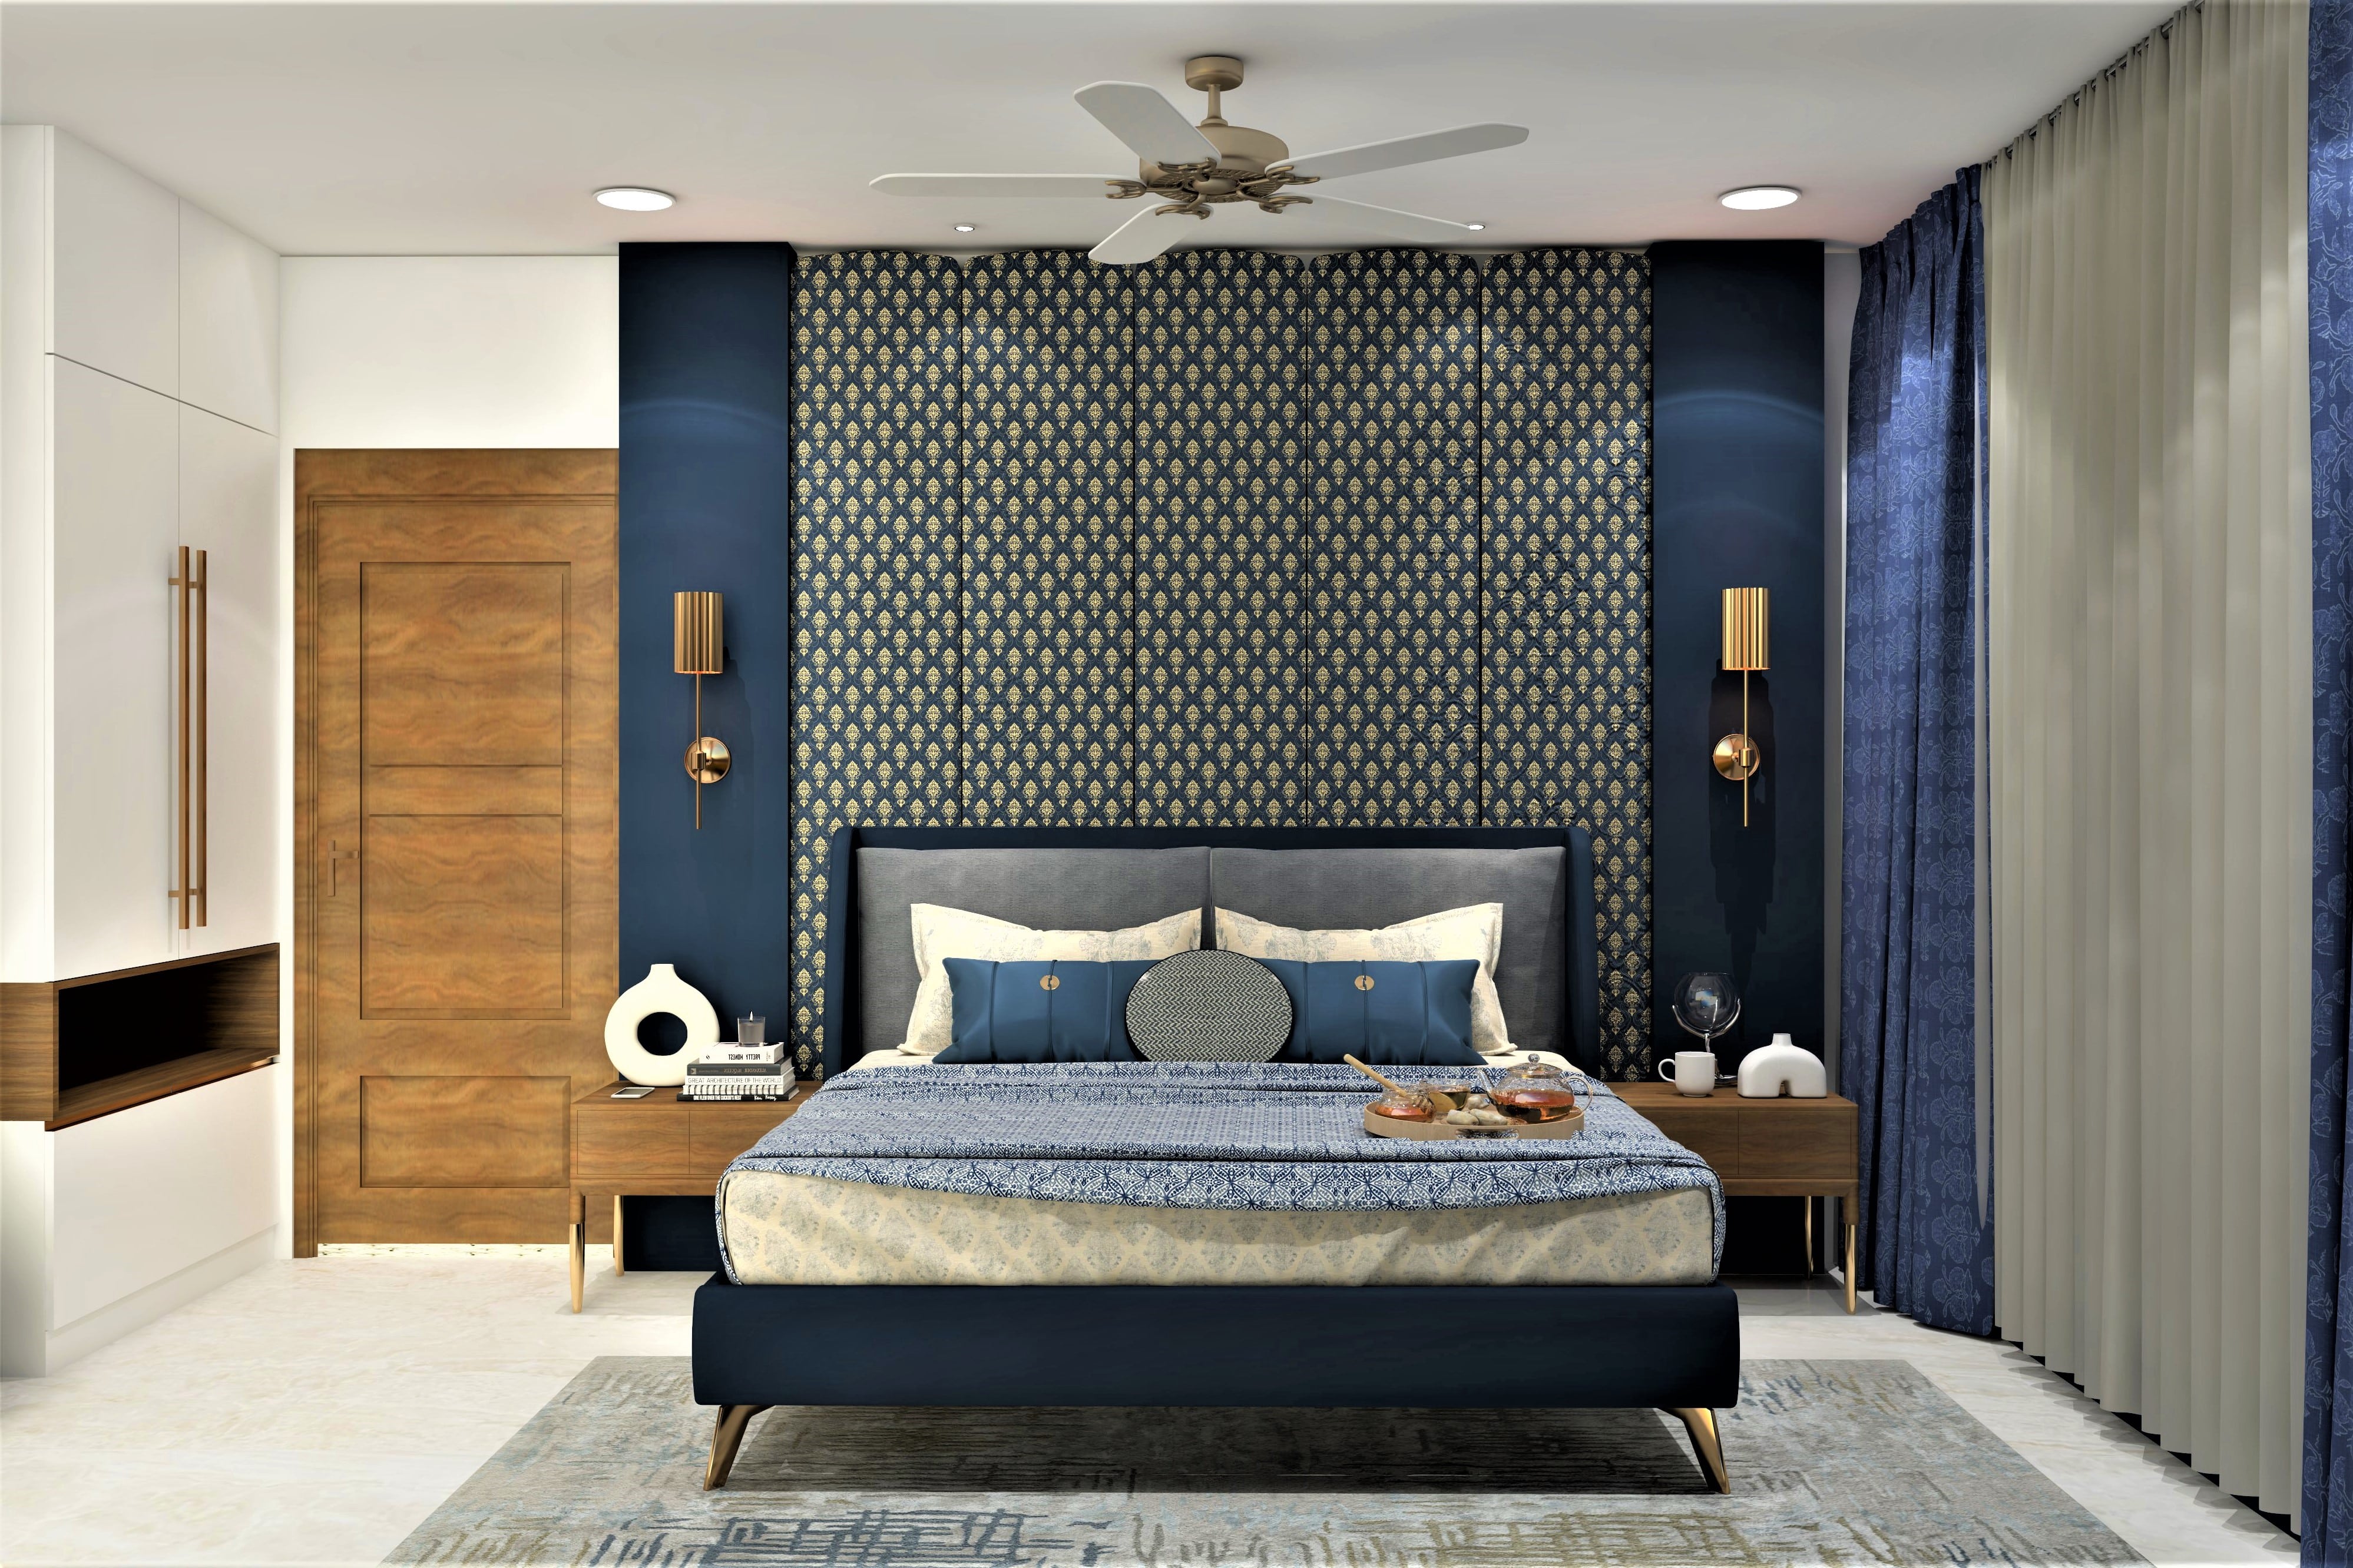 Indian contemporary bedroom design with elegant accents - Beautiful Homes